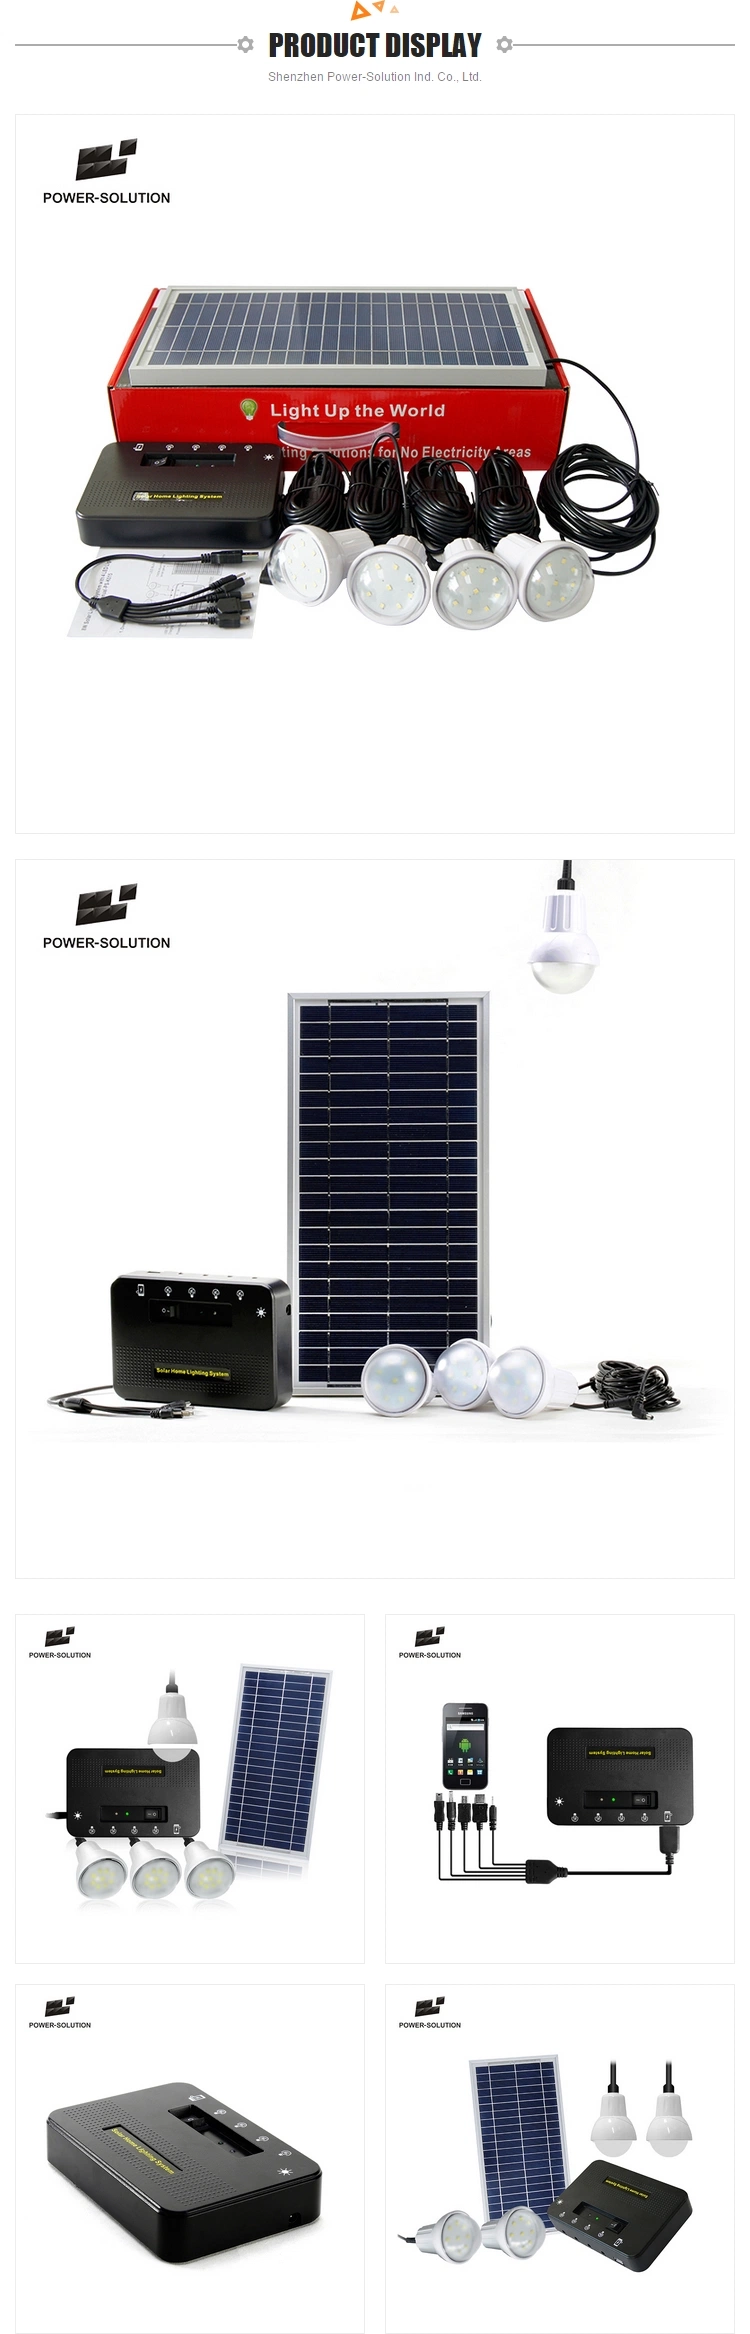 4W DC 4 Light System Complete Set Solar Home Energy Panel Kits Lighting System Battery Power Mini Camping Portable Station